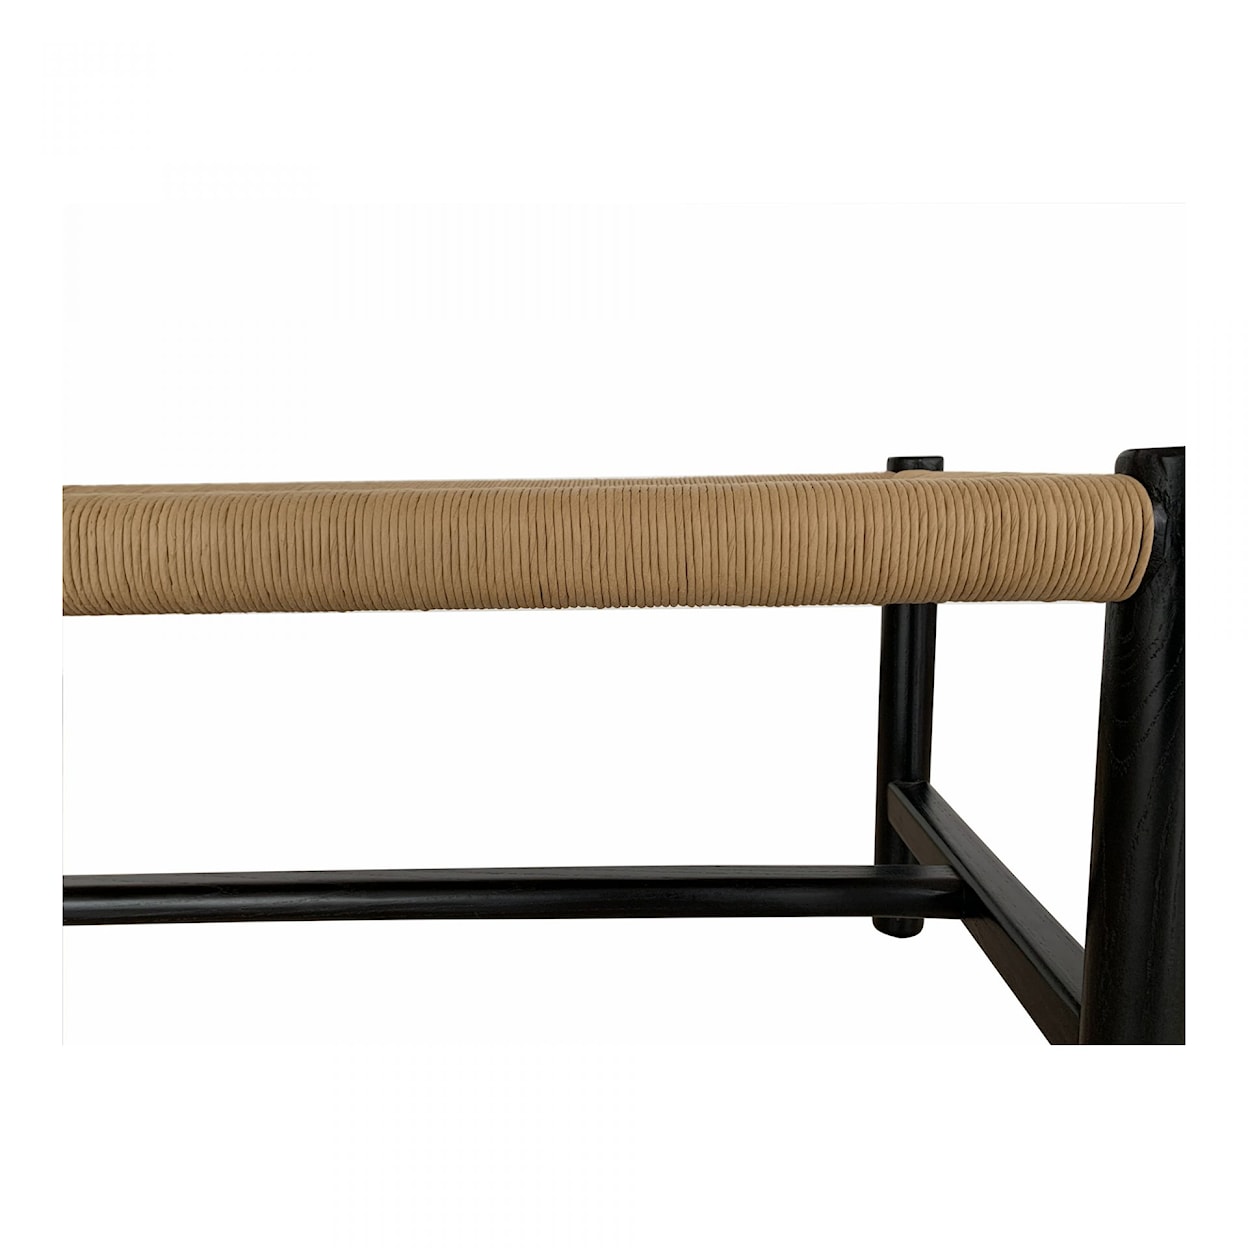 Moe's Home Collection Hawthorn Bench Small Black